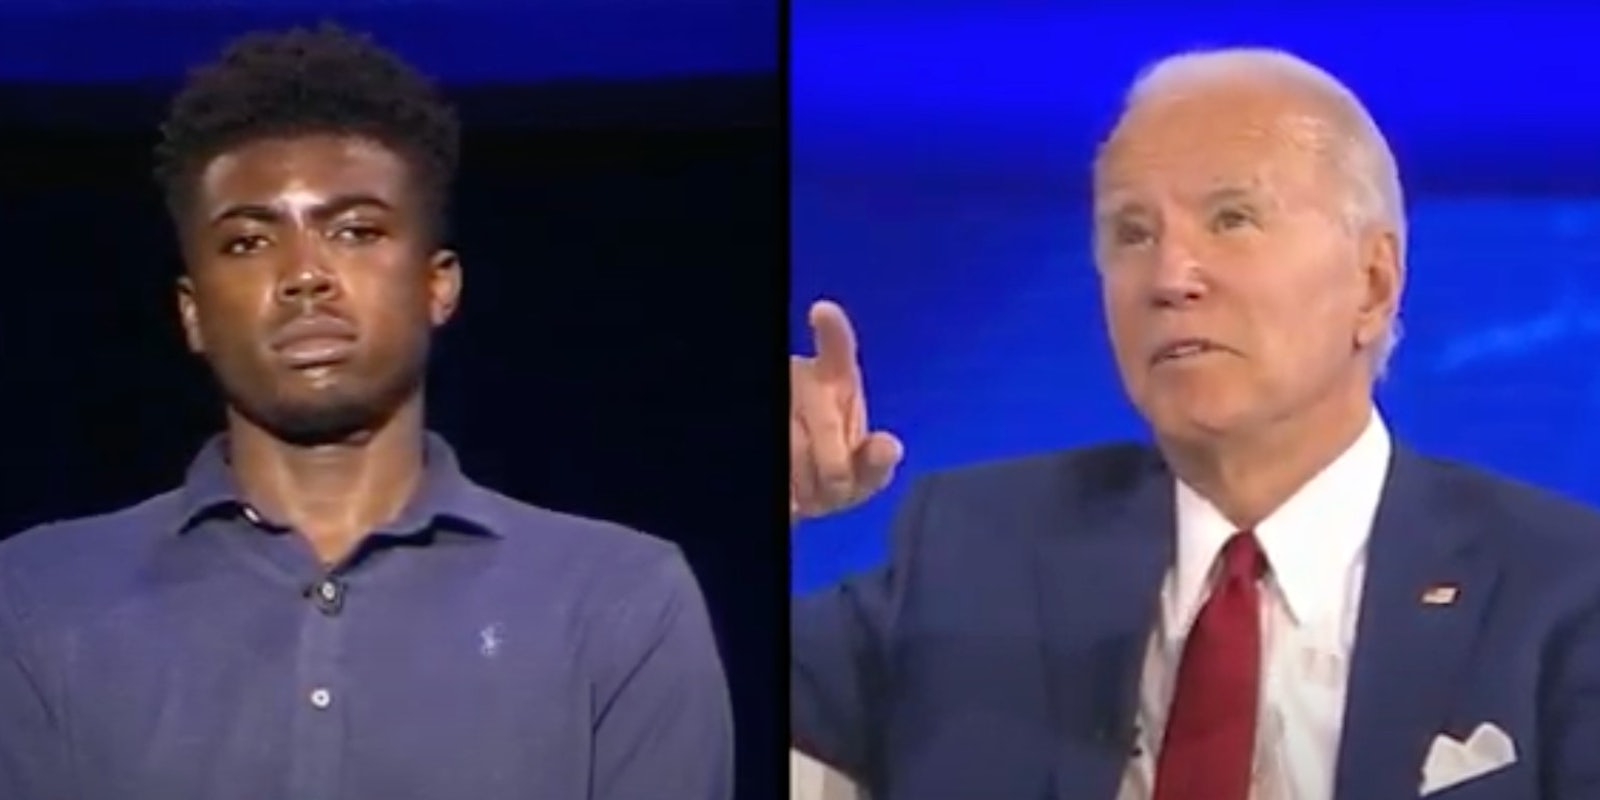 Biden is called out for 'you ain't black' comment at town hall